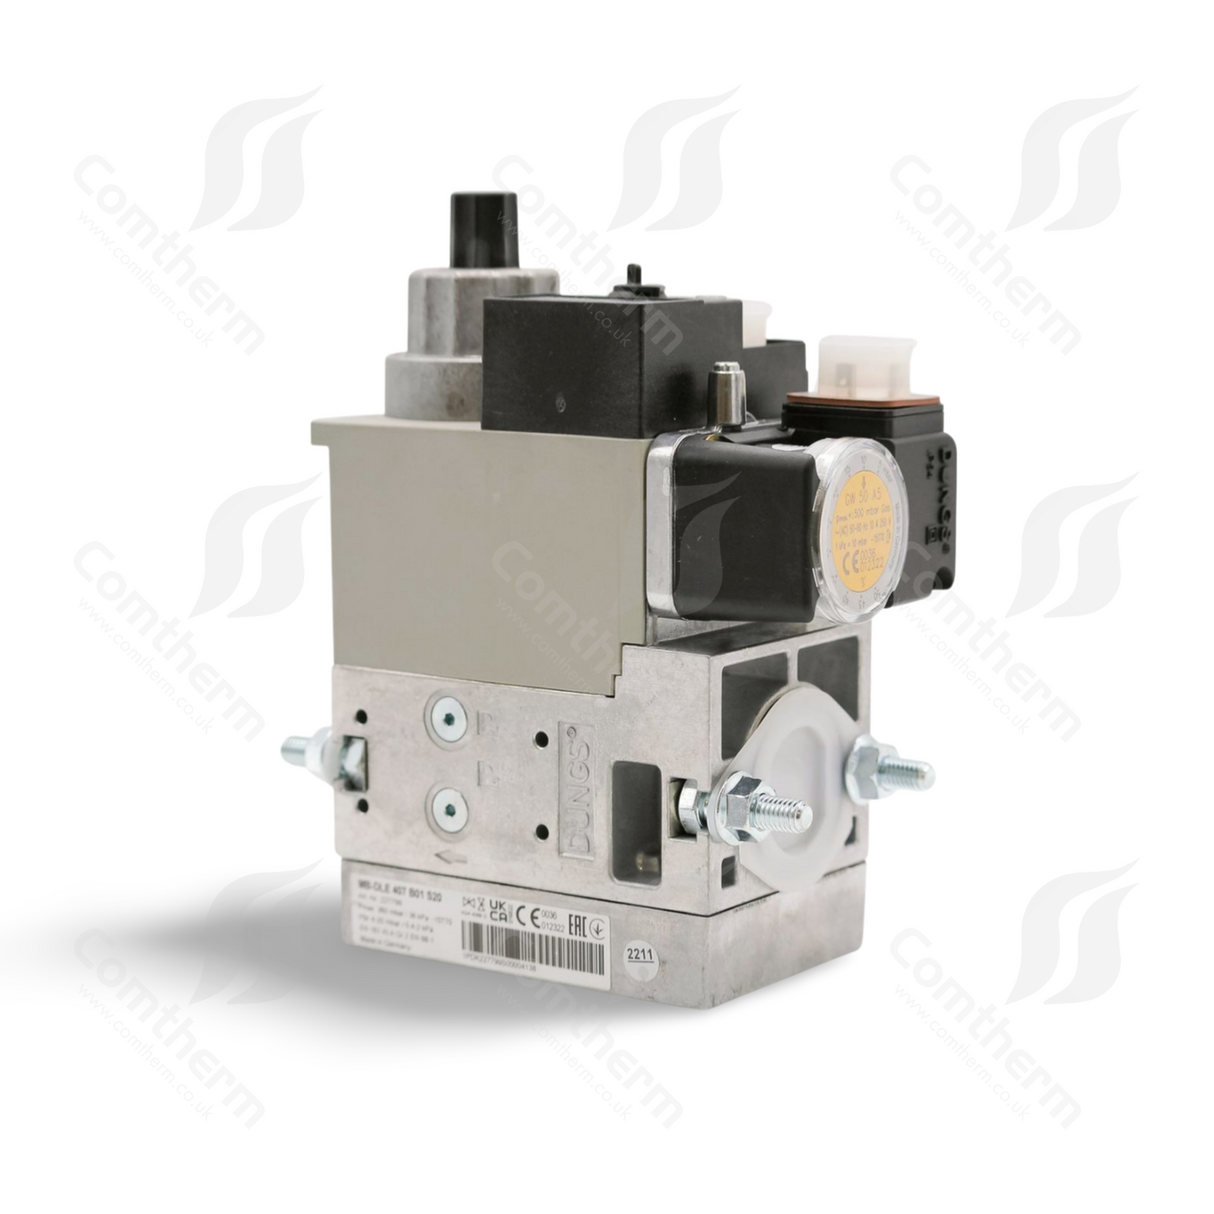 Dungs MB-DLE 407 B01 S52 + GW150A5 Multiblock-Gasventil – 110 V 